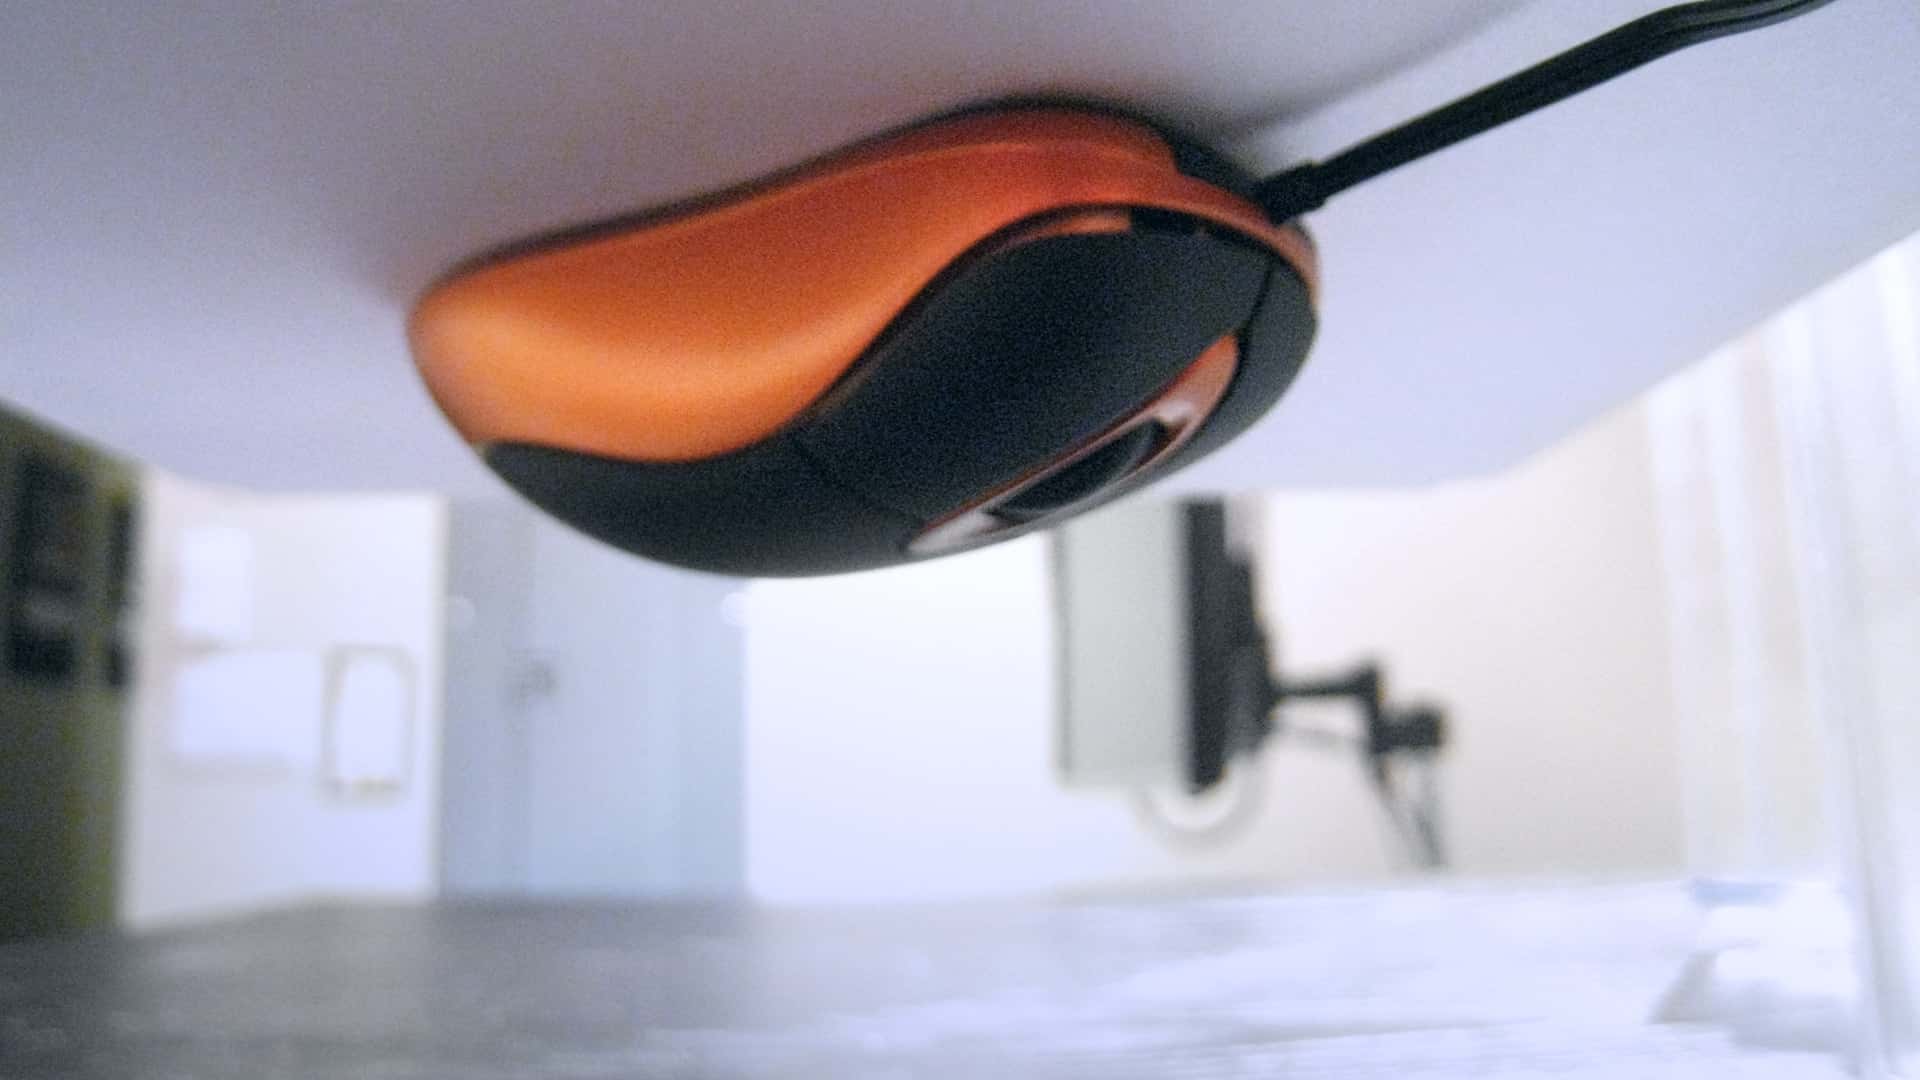 Upside-down magnetic mouse